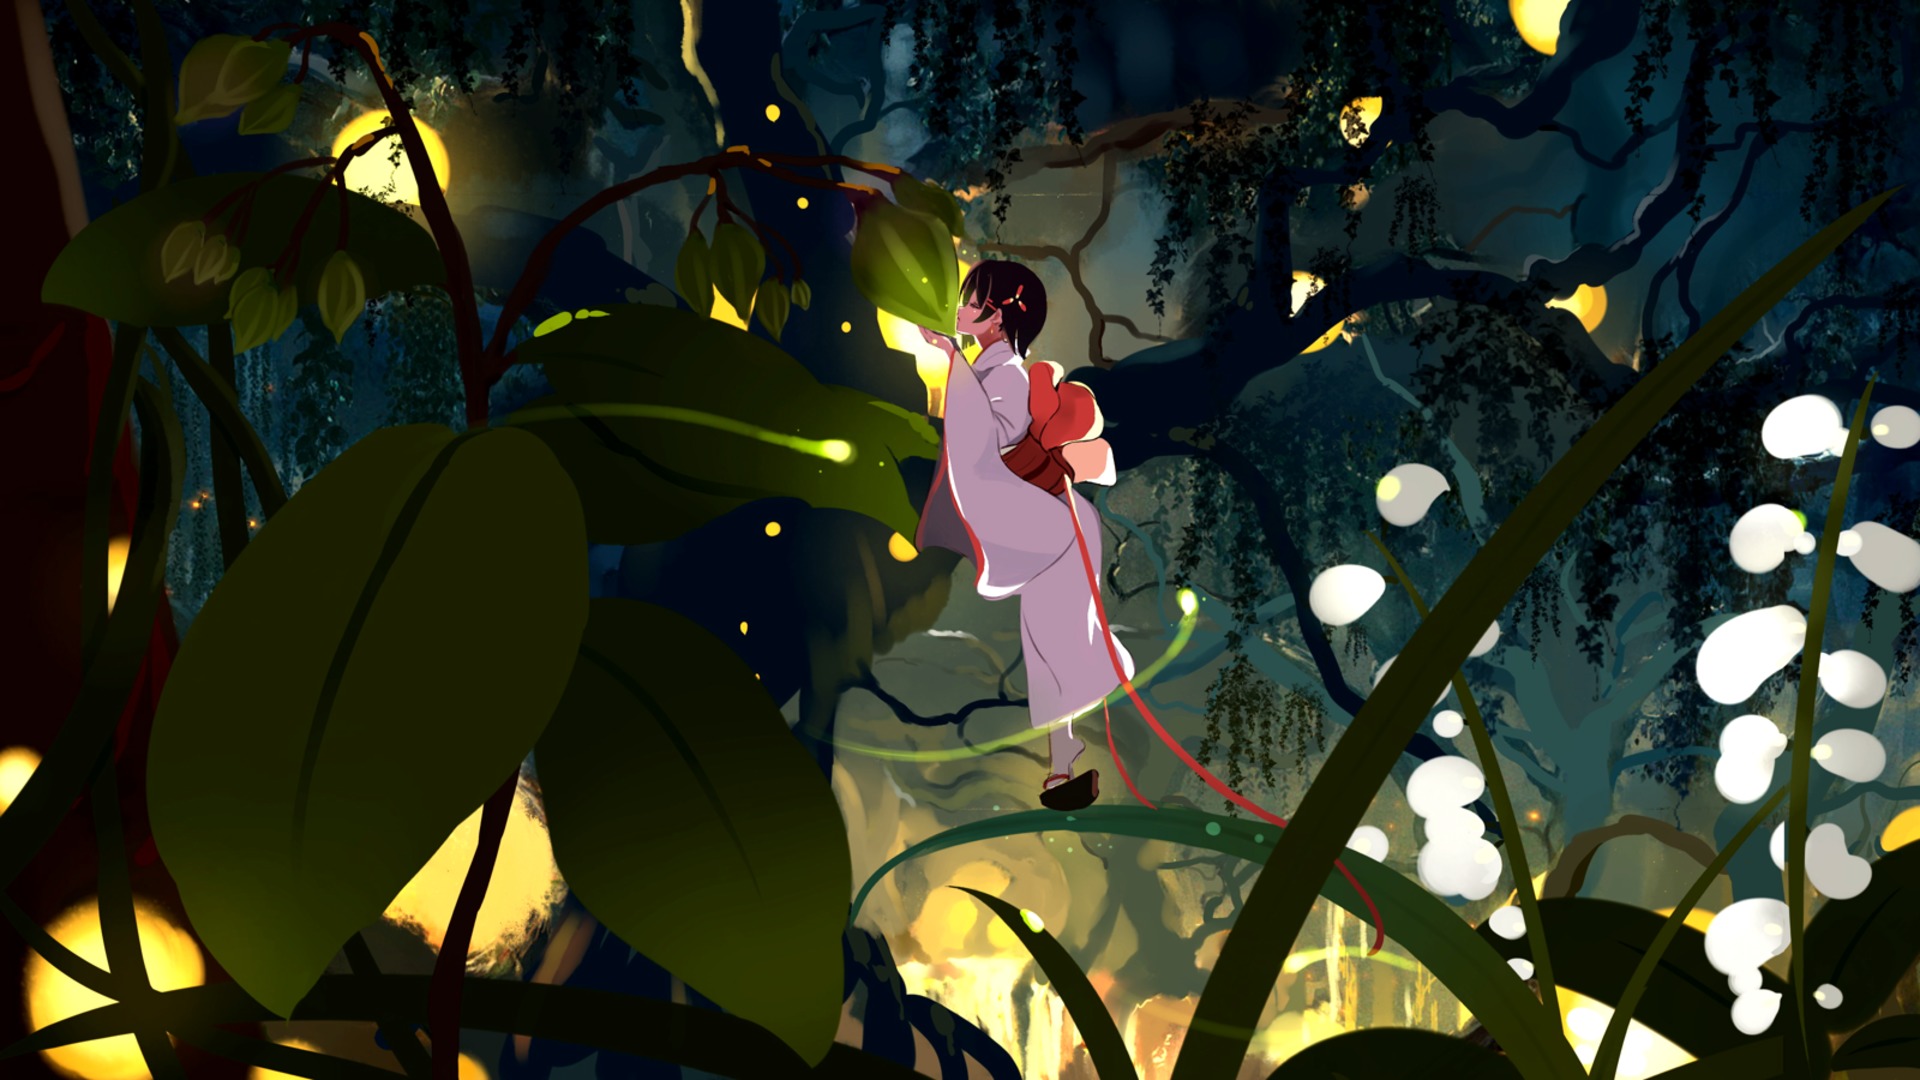 Little Girl Forest Nature Drinking Firefly 1920x1080